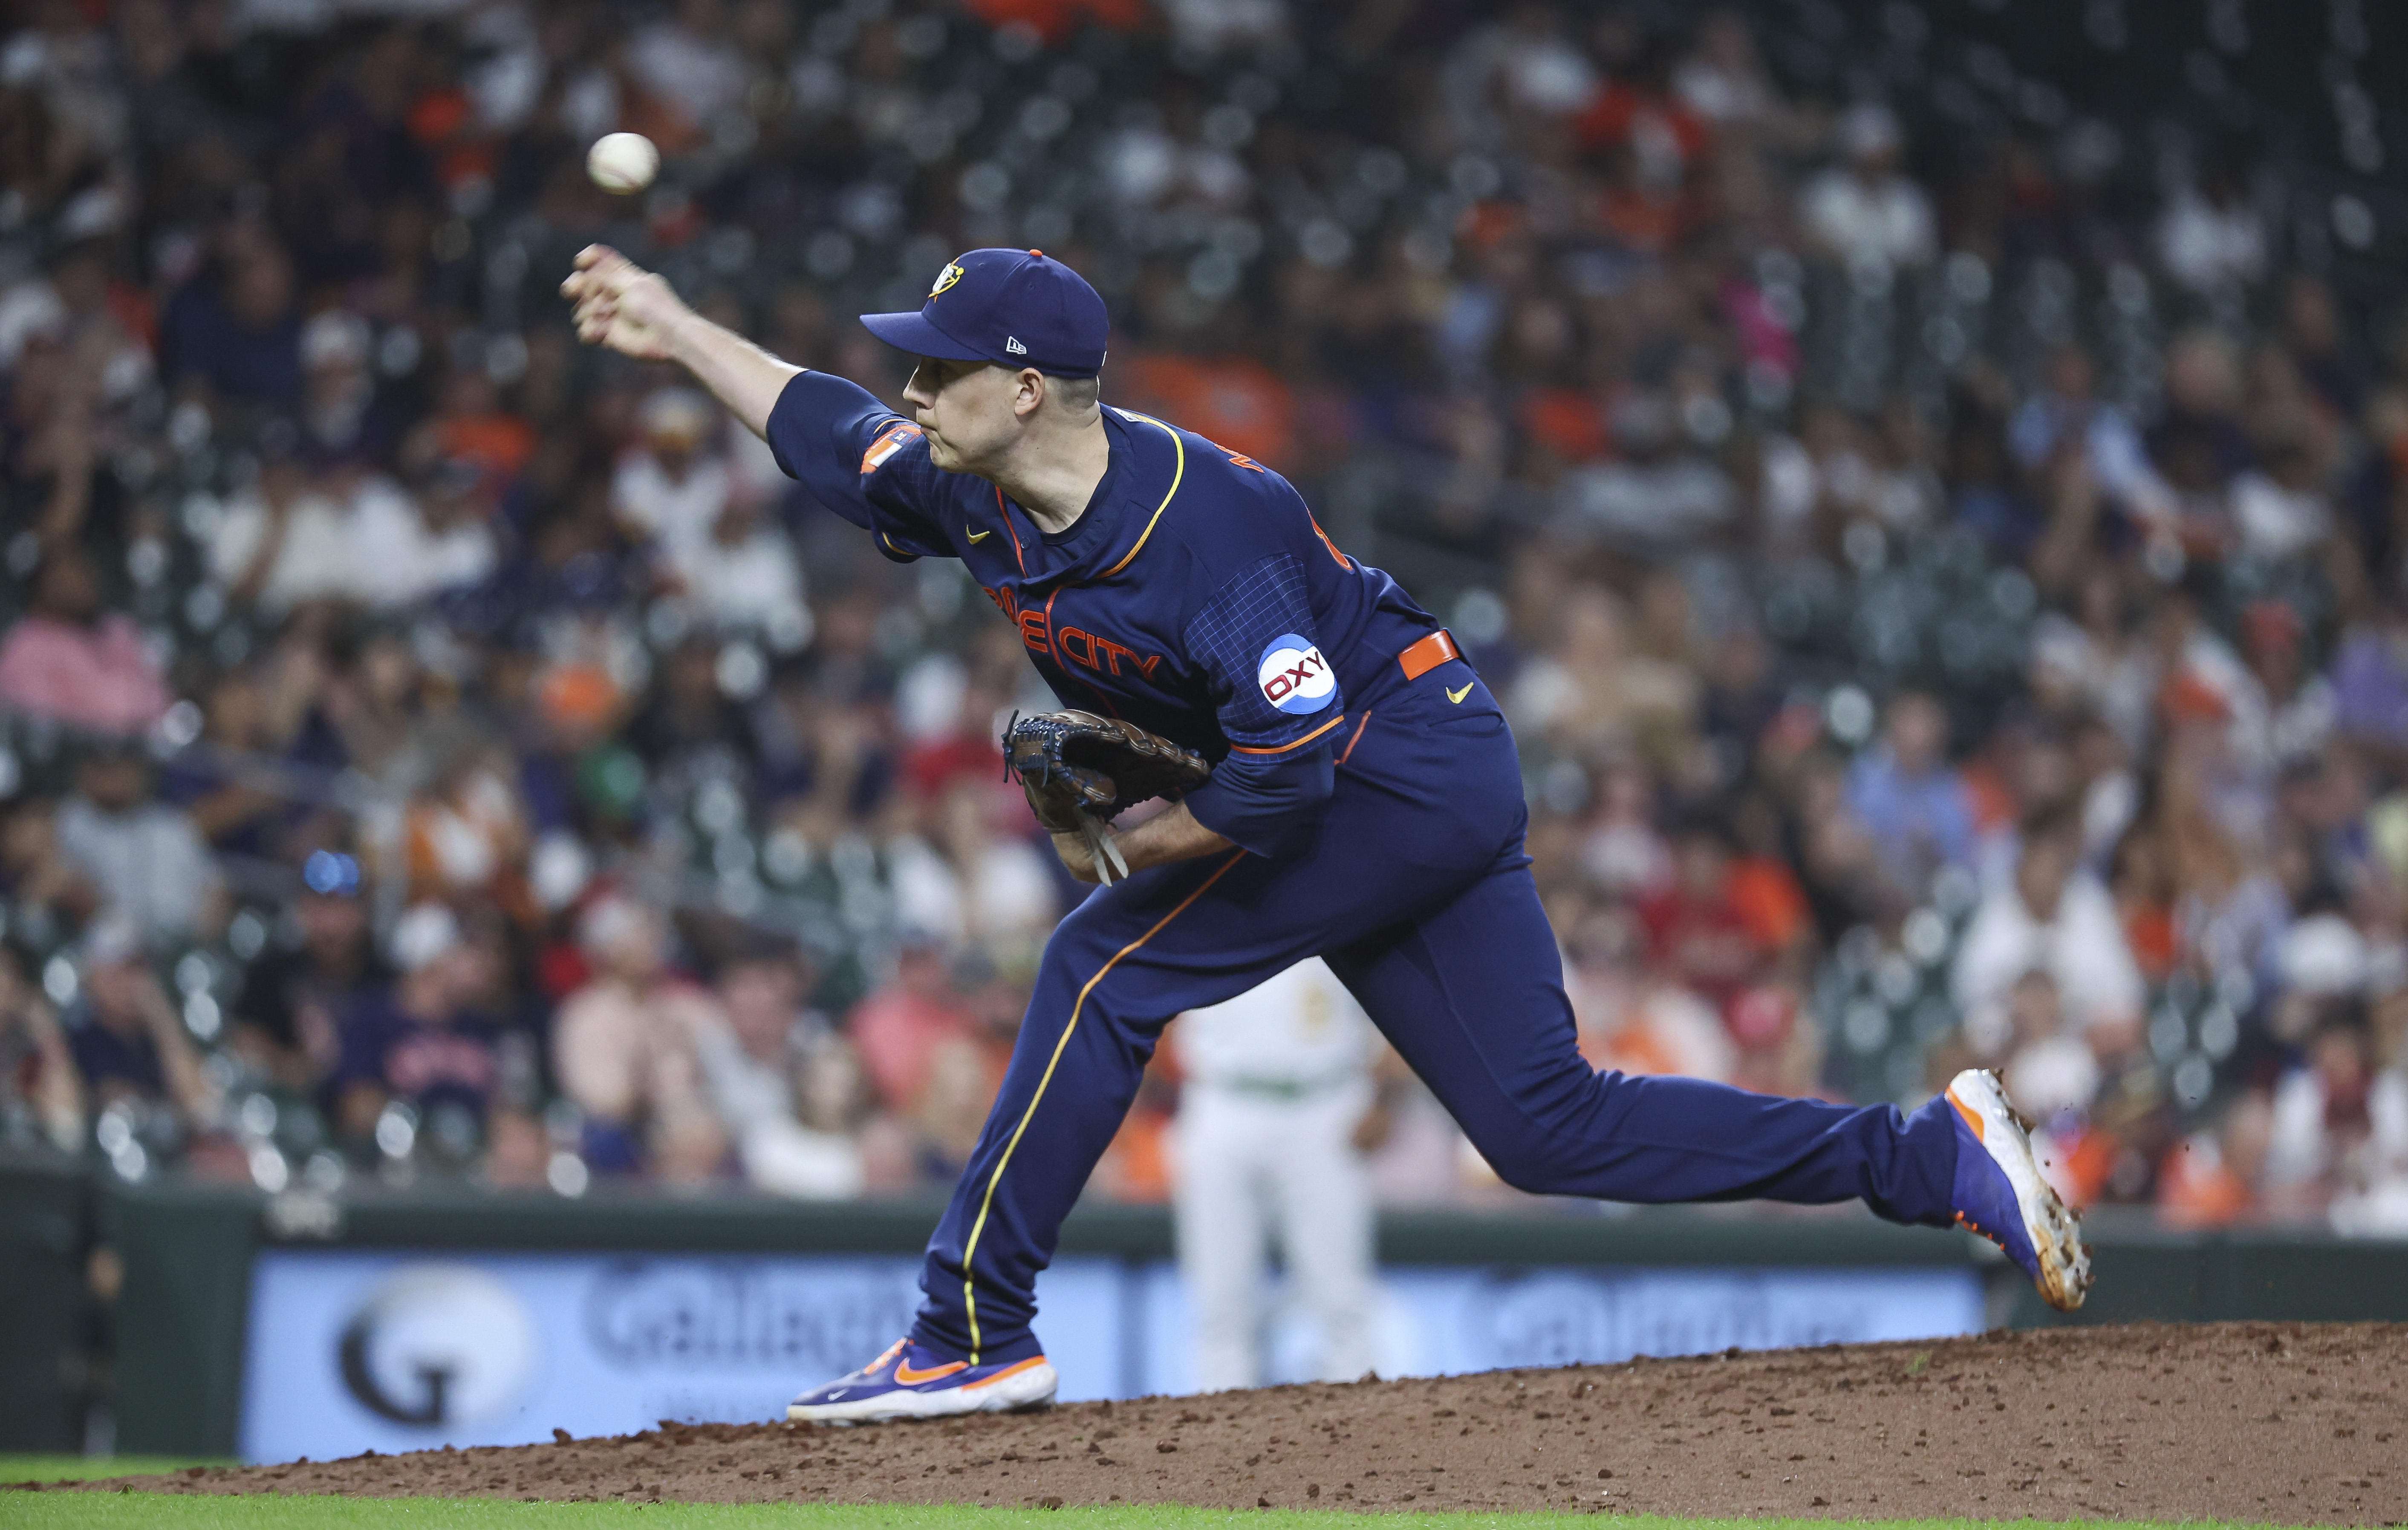 Waldichuk holds Astros hitless in relief, A's launch 3 homers in 4